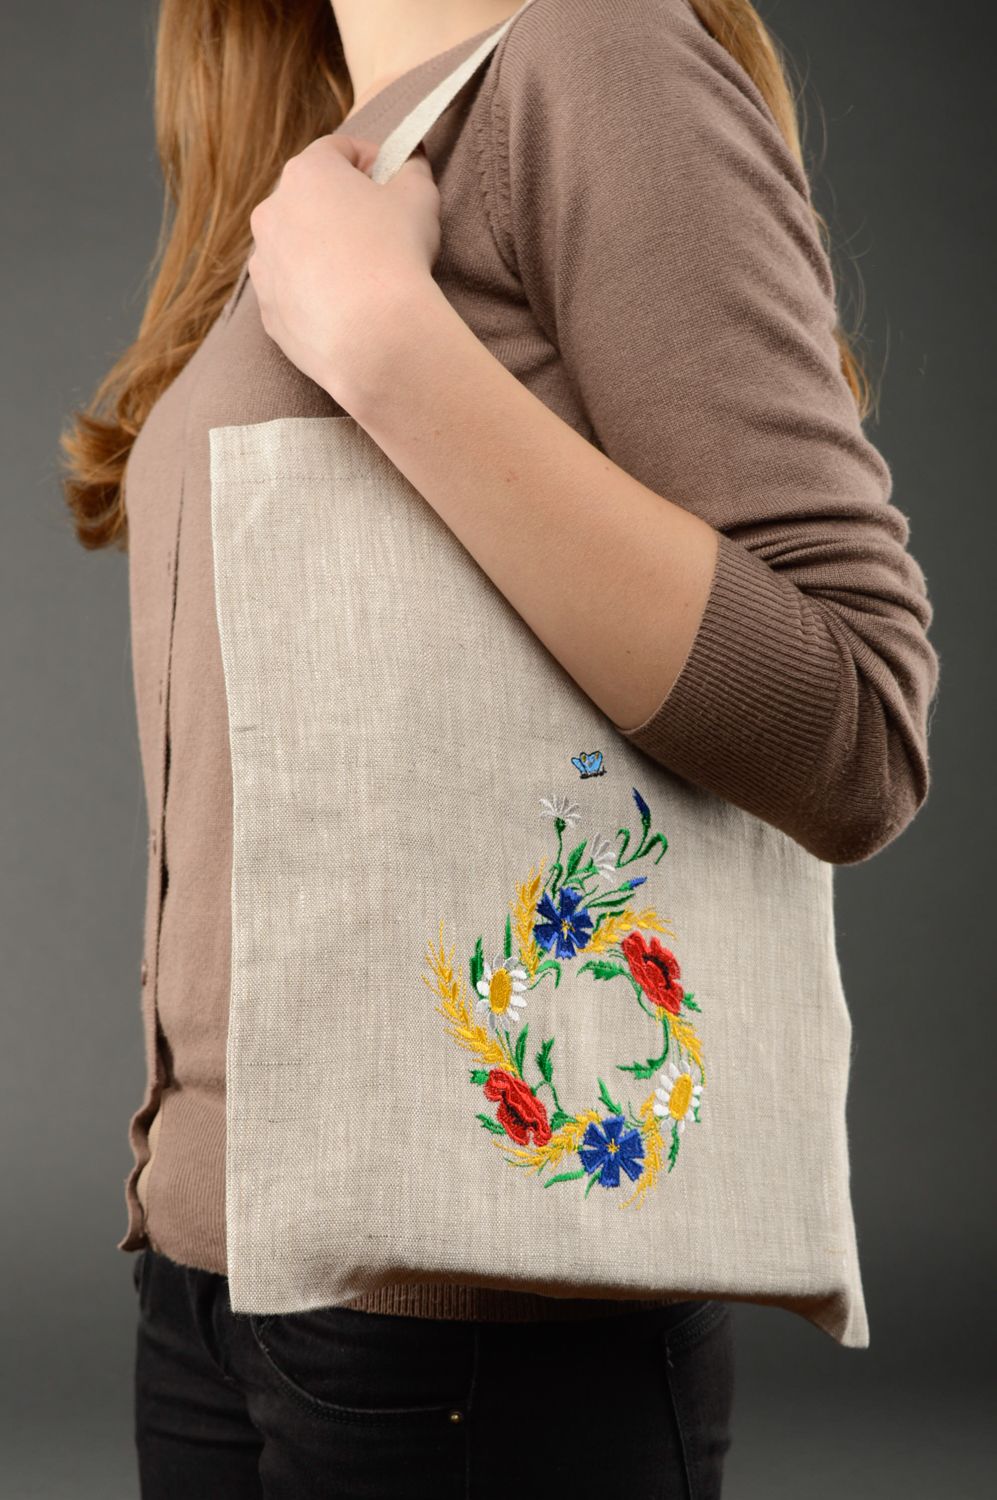 Handmade women's fabric bag with embroidered flowers photo 2